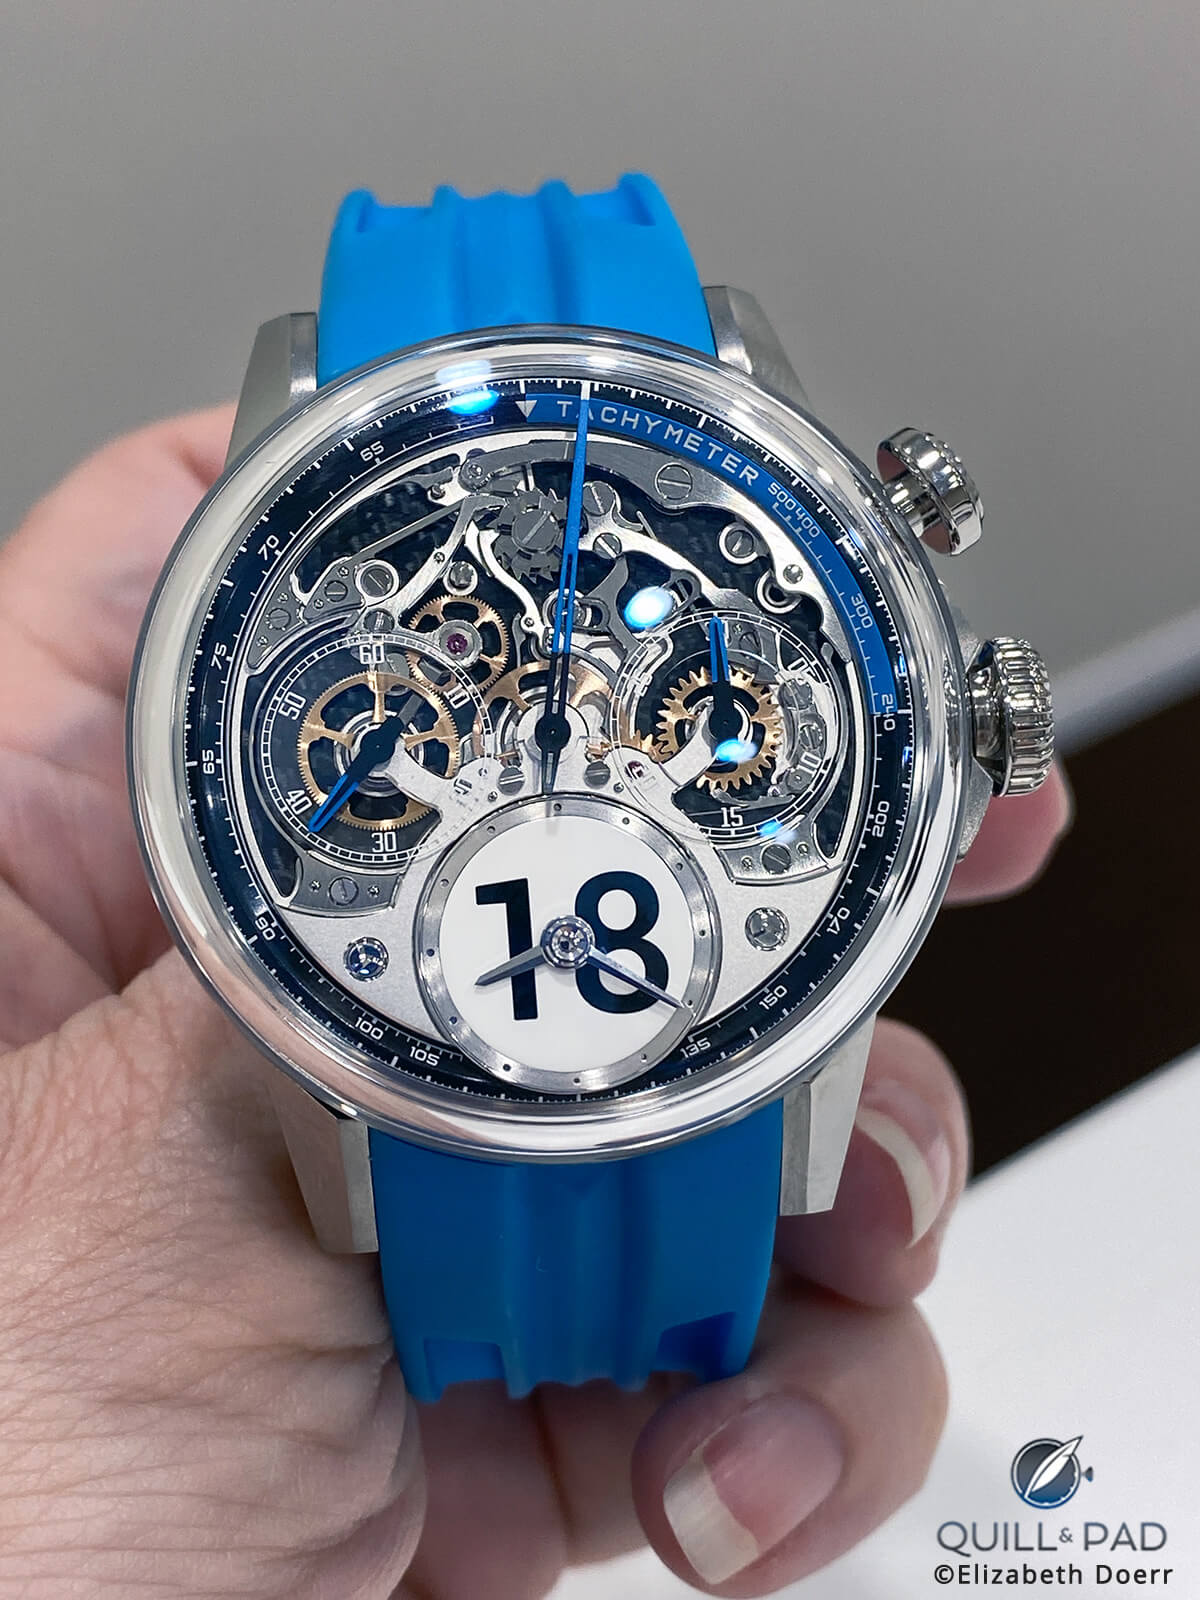 Louis Moinet Pays Homage To A Car Racing Tradition With Time To Race Chronograph Collection Of Unique Pieces